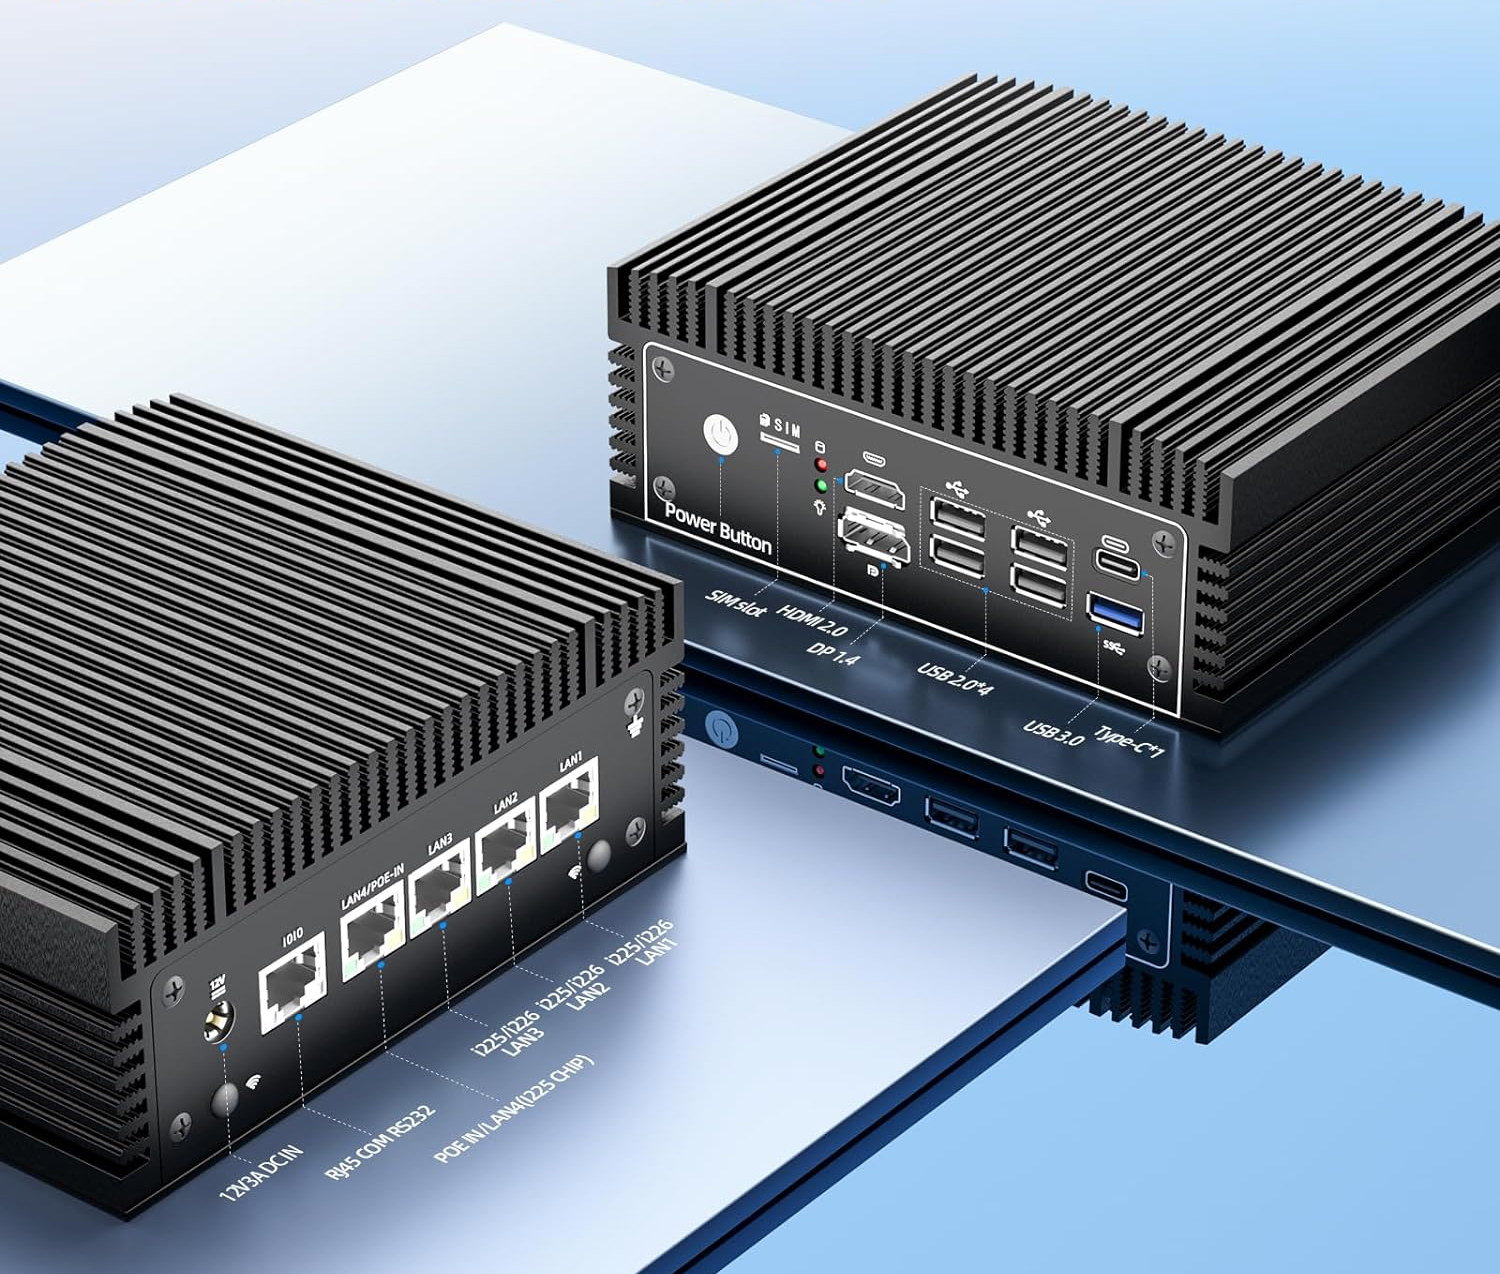 Fanless Intel N100 mini PC supports PoE power input, provides four